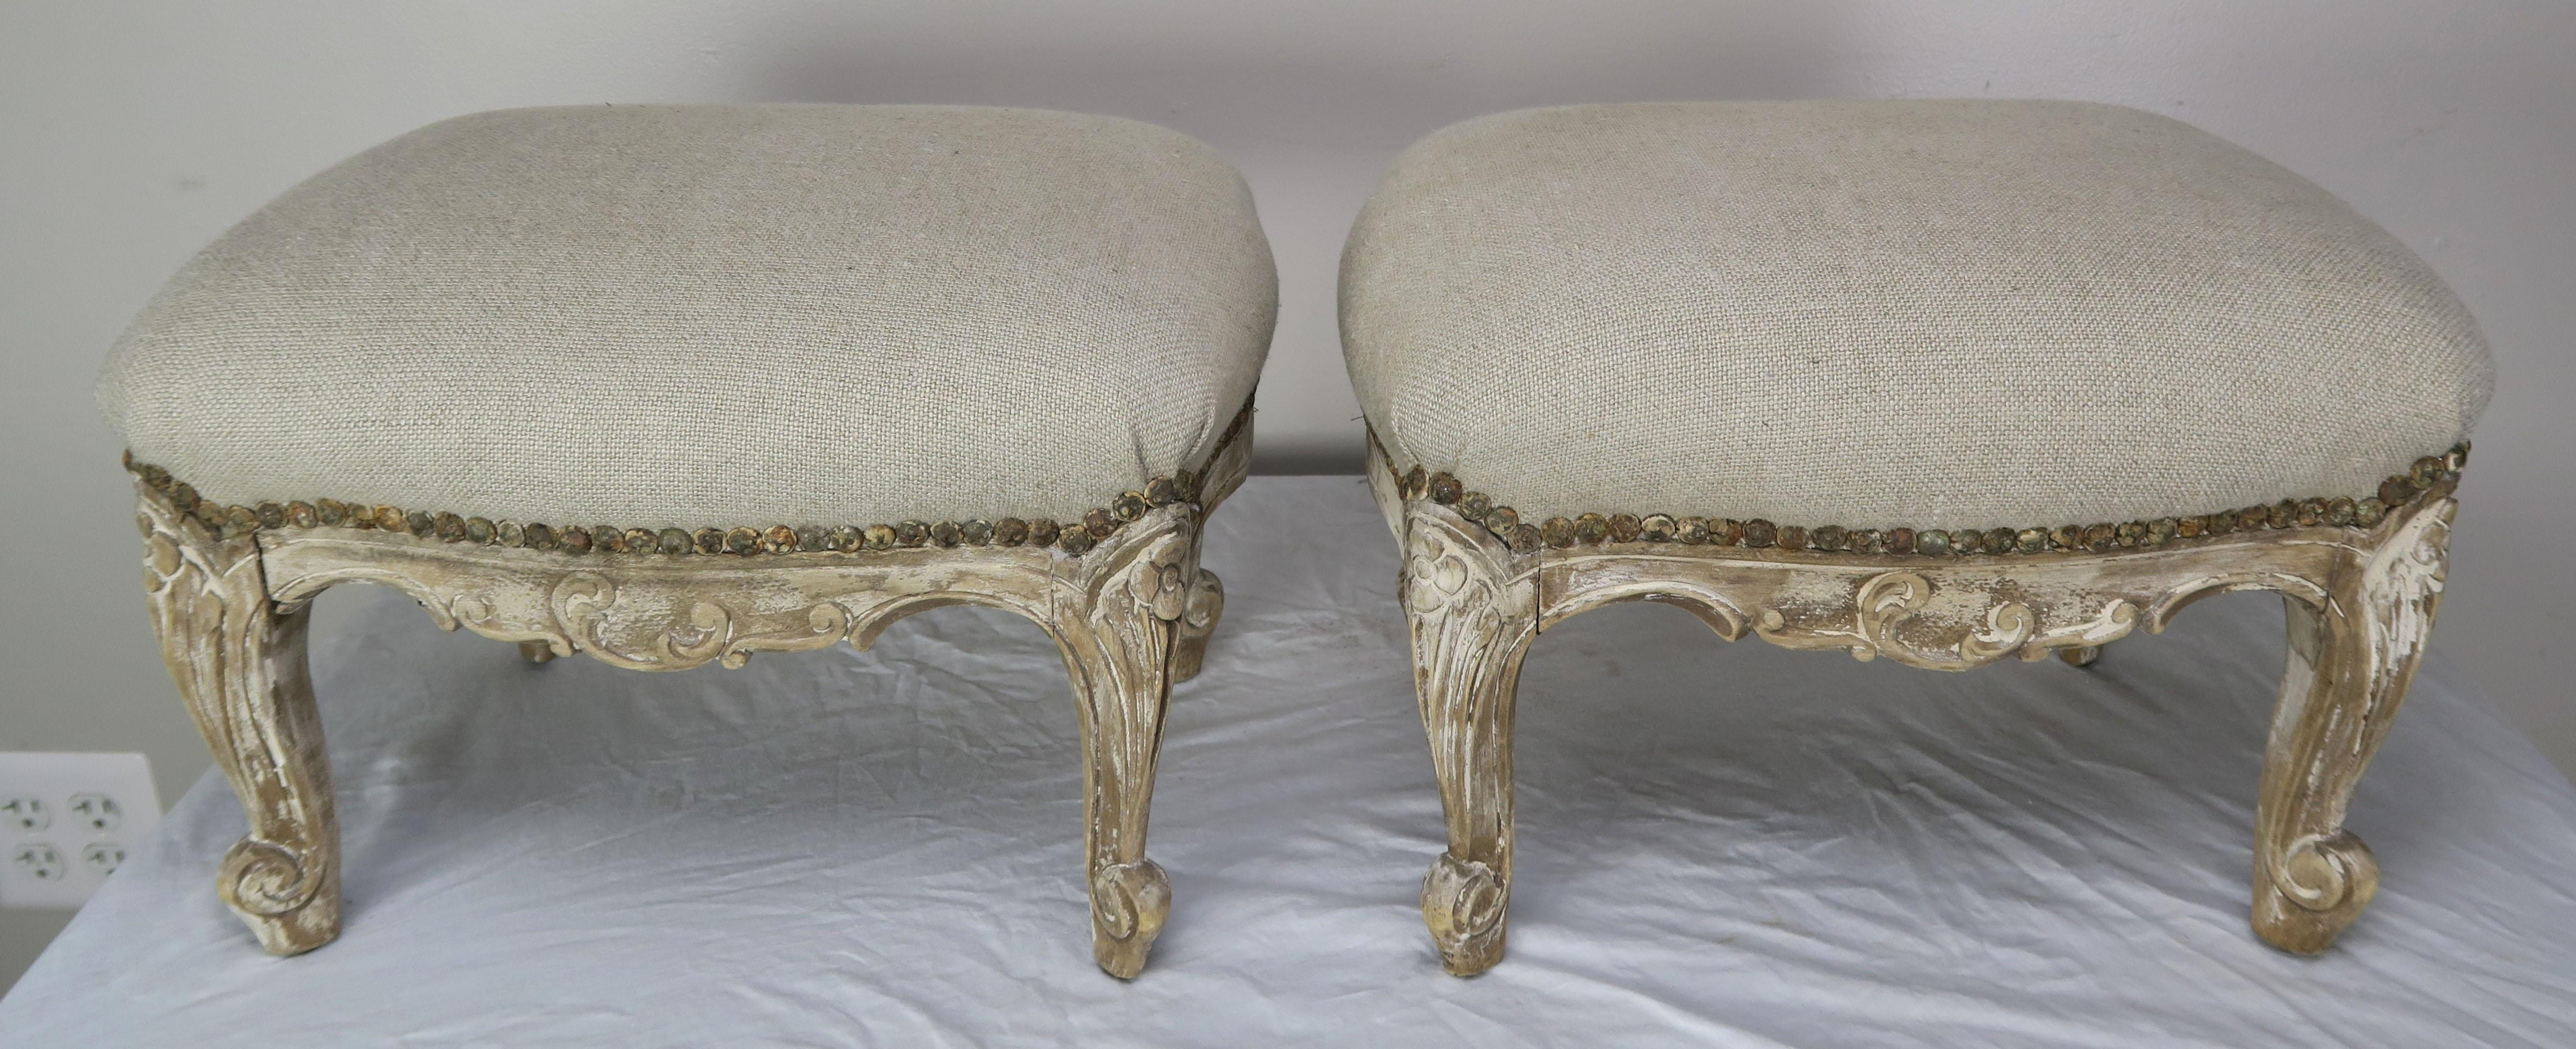 19th Century French Painted Benches/Footstools, Pair 5